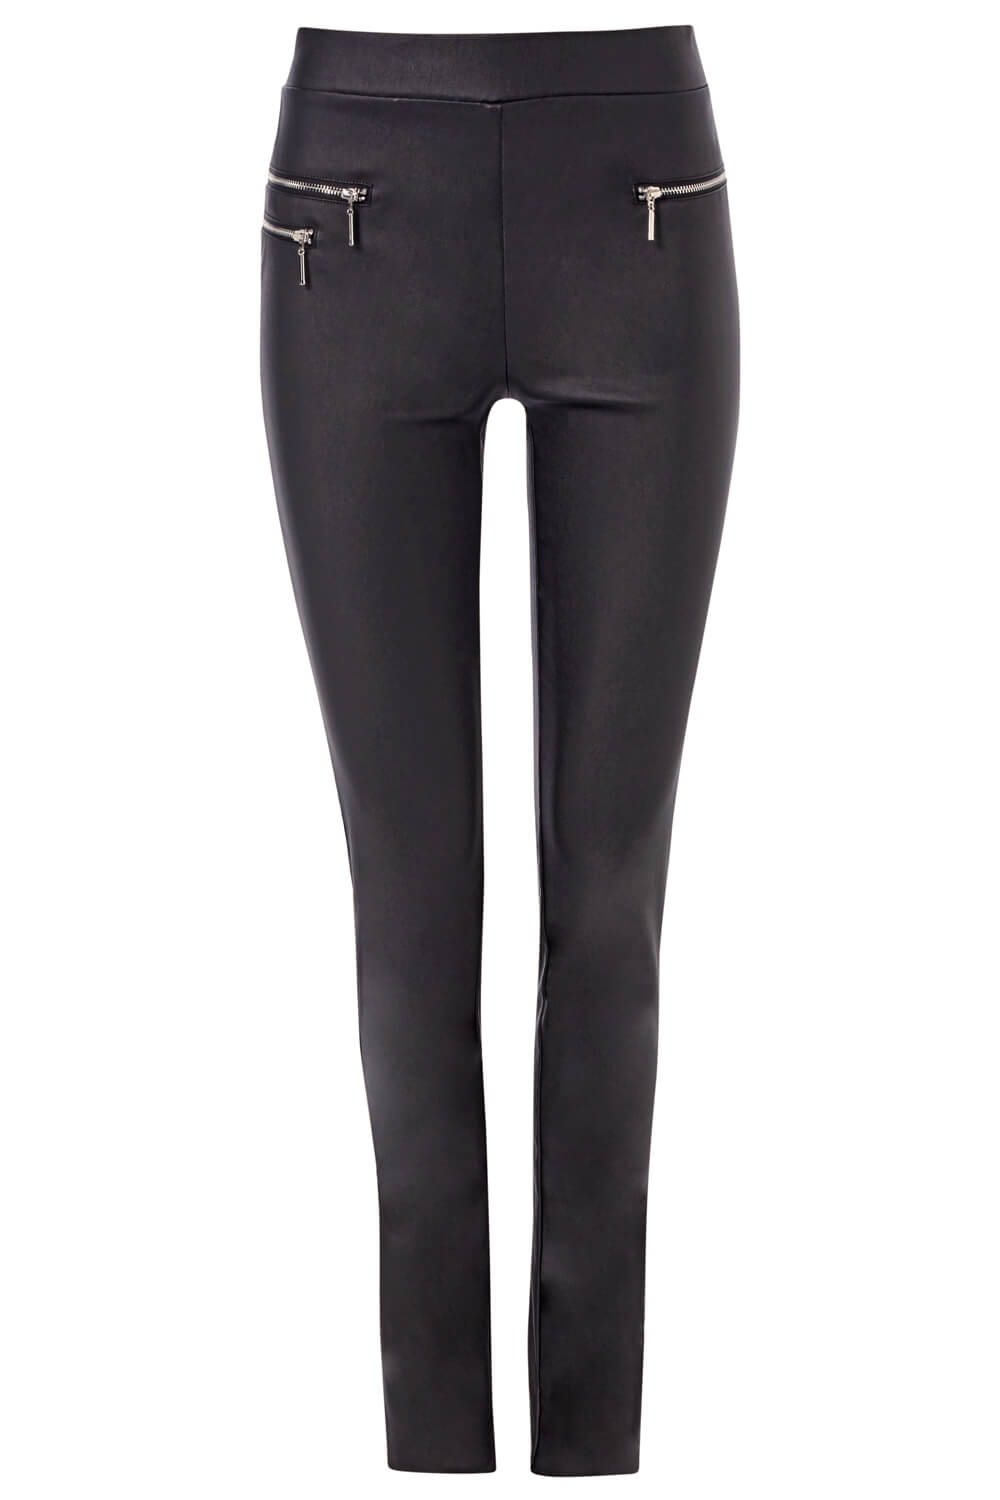 Black Faux Leather Zip Detail Trousers , Image 5 of 5